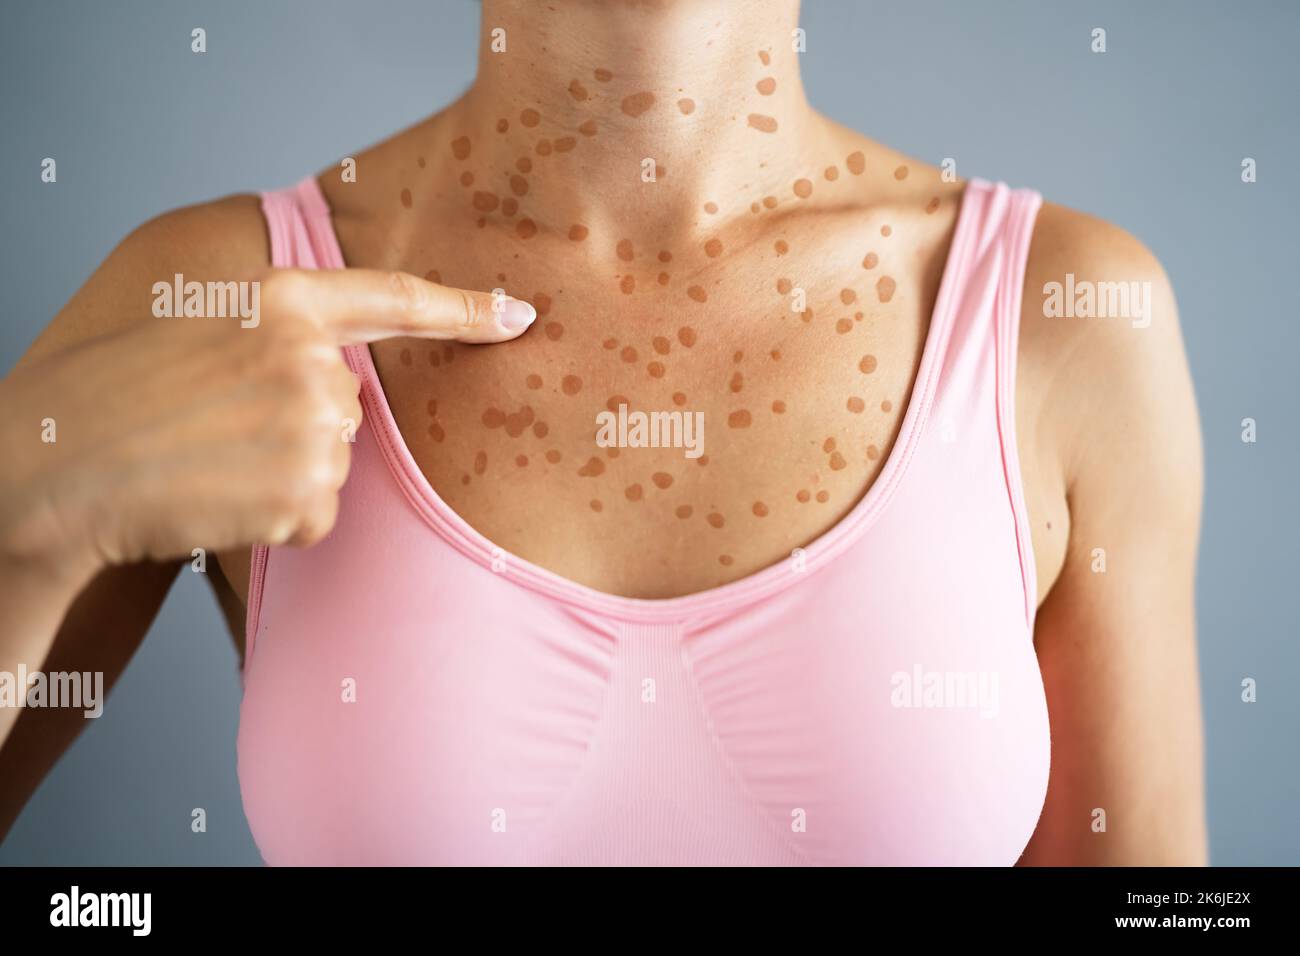 Woman Body Skin Rash With Red Allergy Eruption Stock Photo